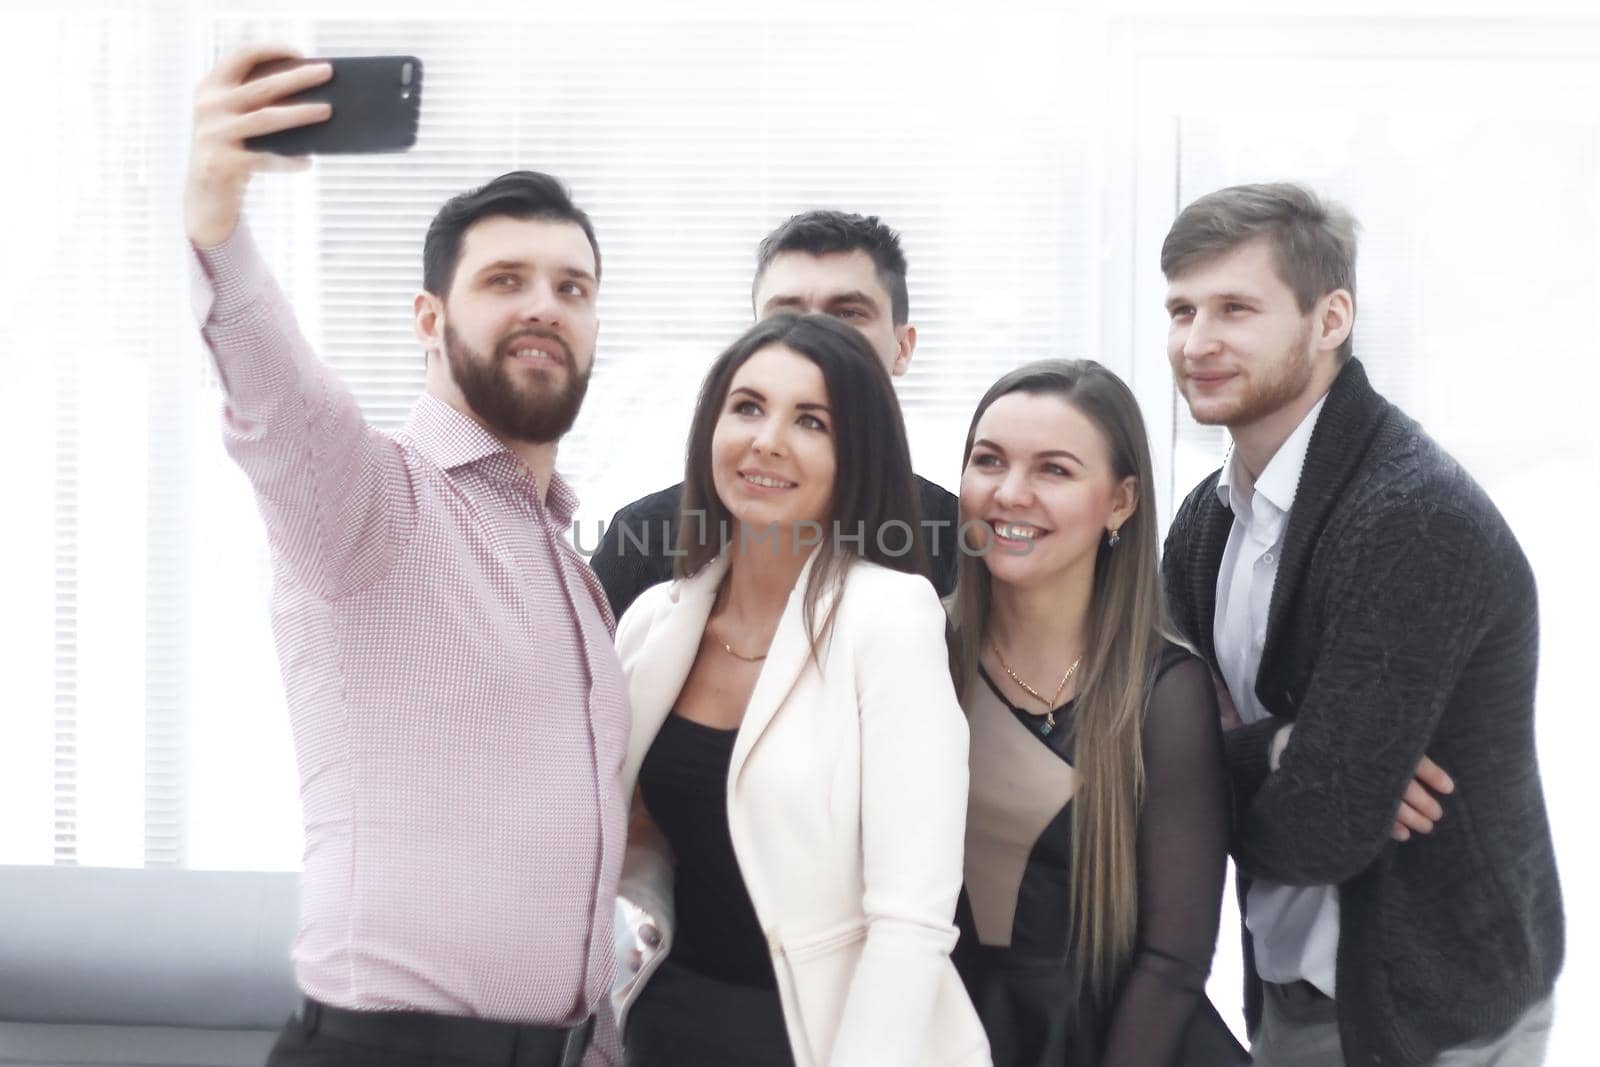 business colleagues taking a selfie in a modern office.